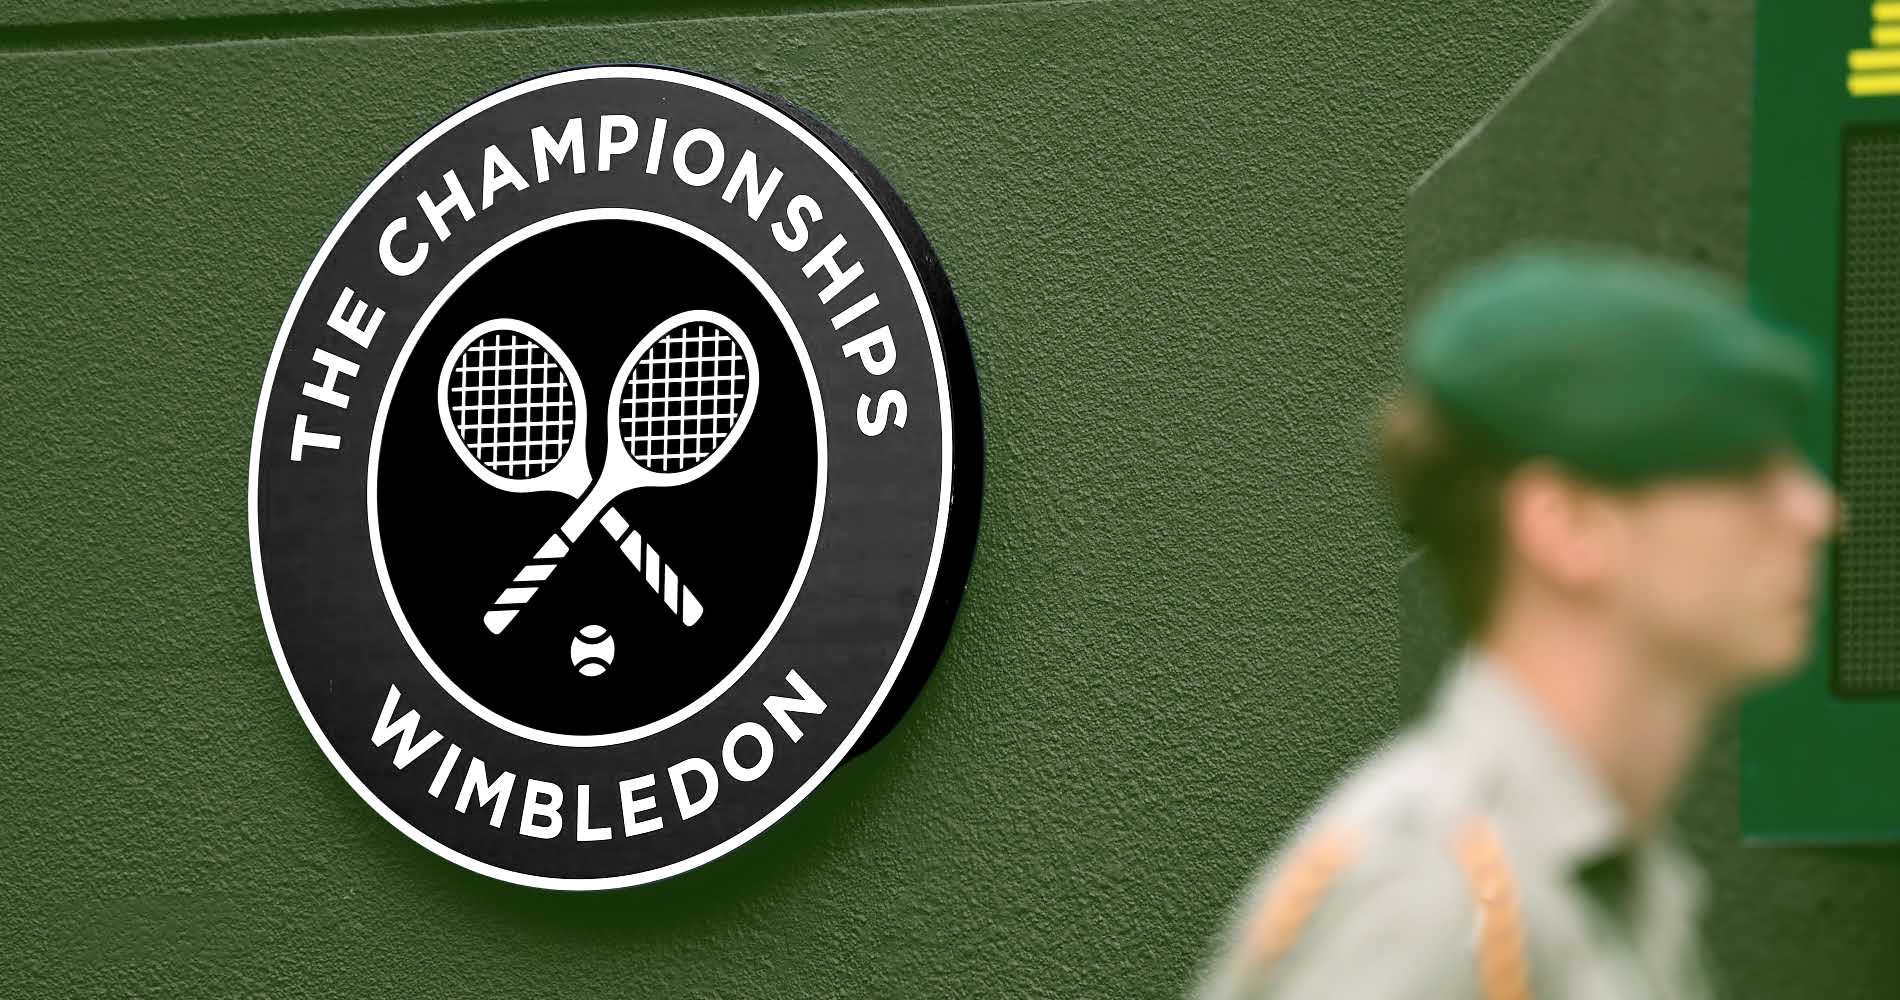 Wimbledon, On this day